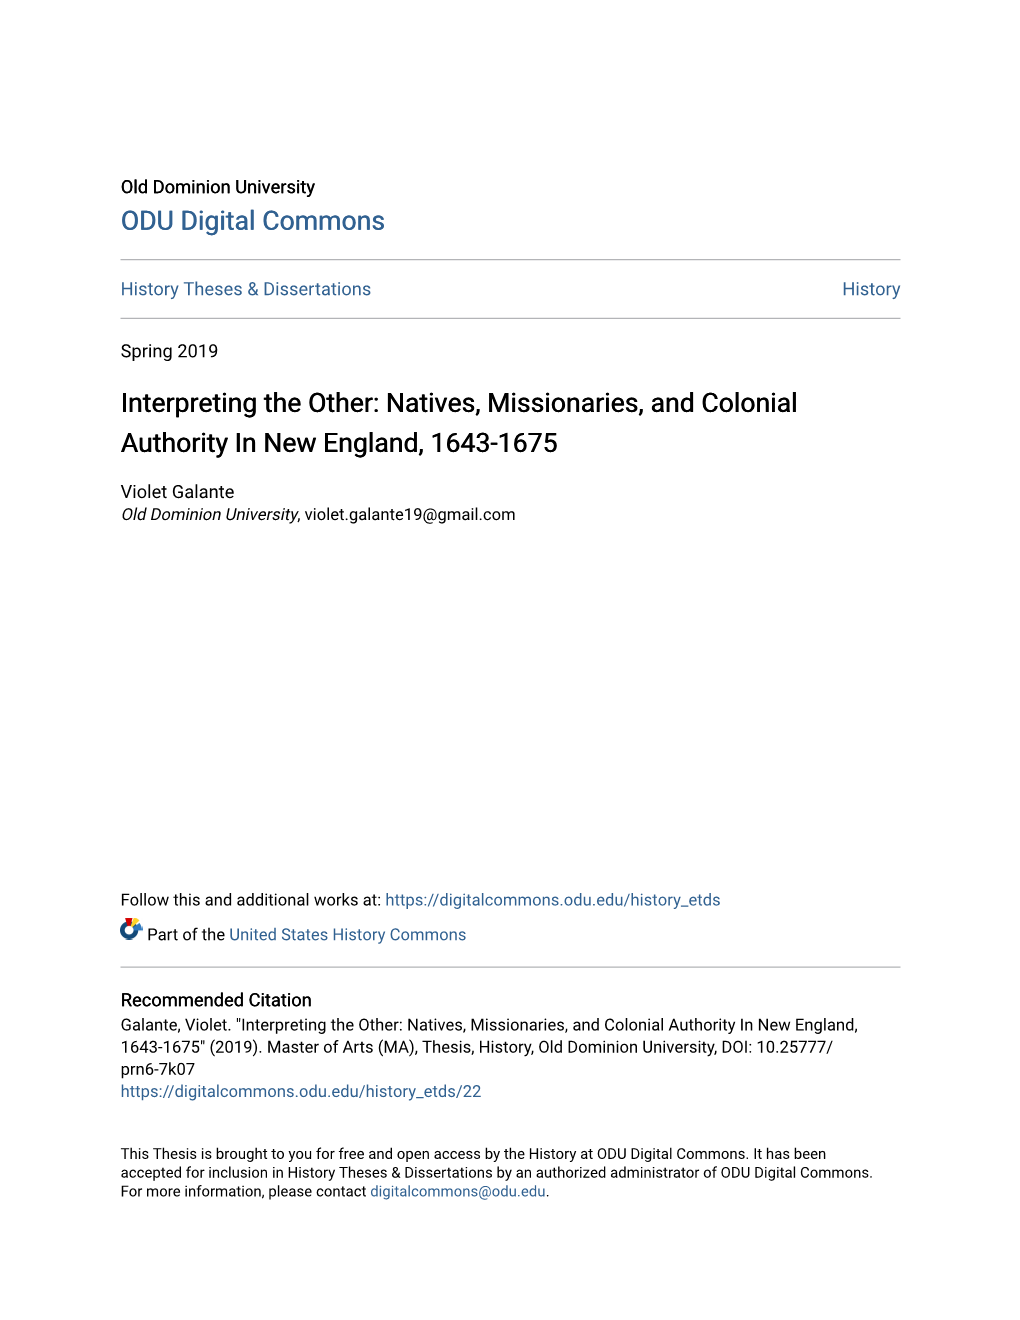 Natives, Missionaries, and Colonial Authority in New England, 1643-1675